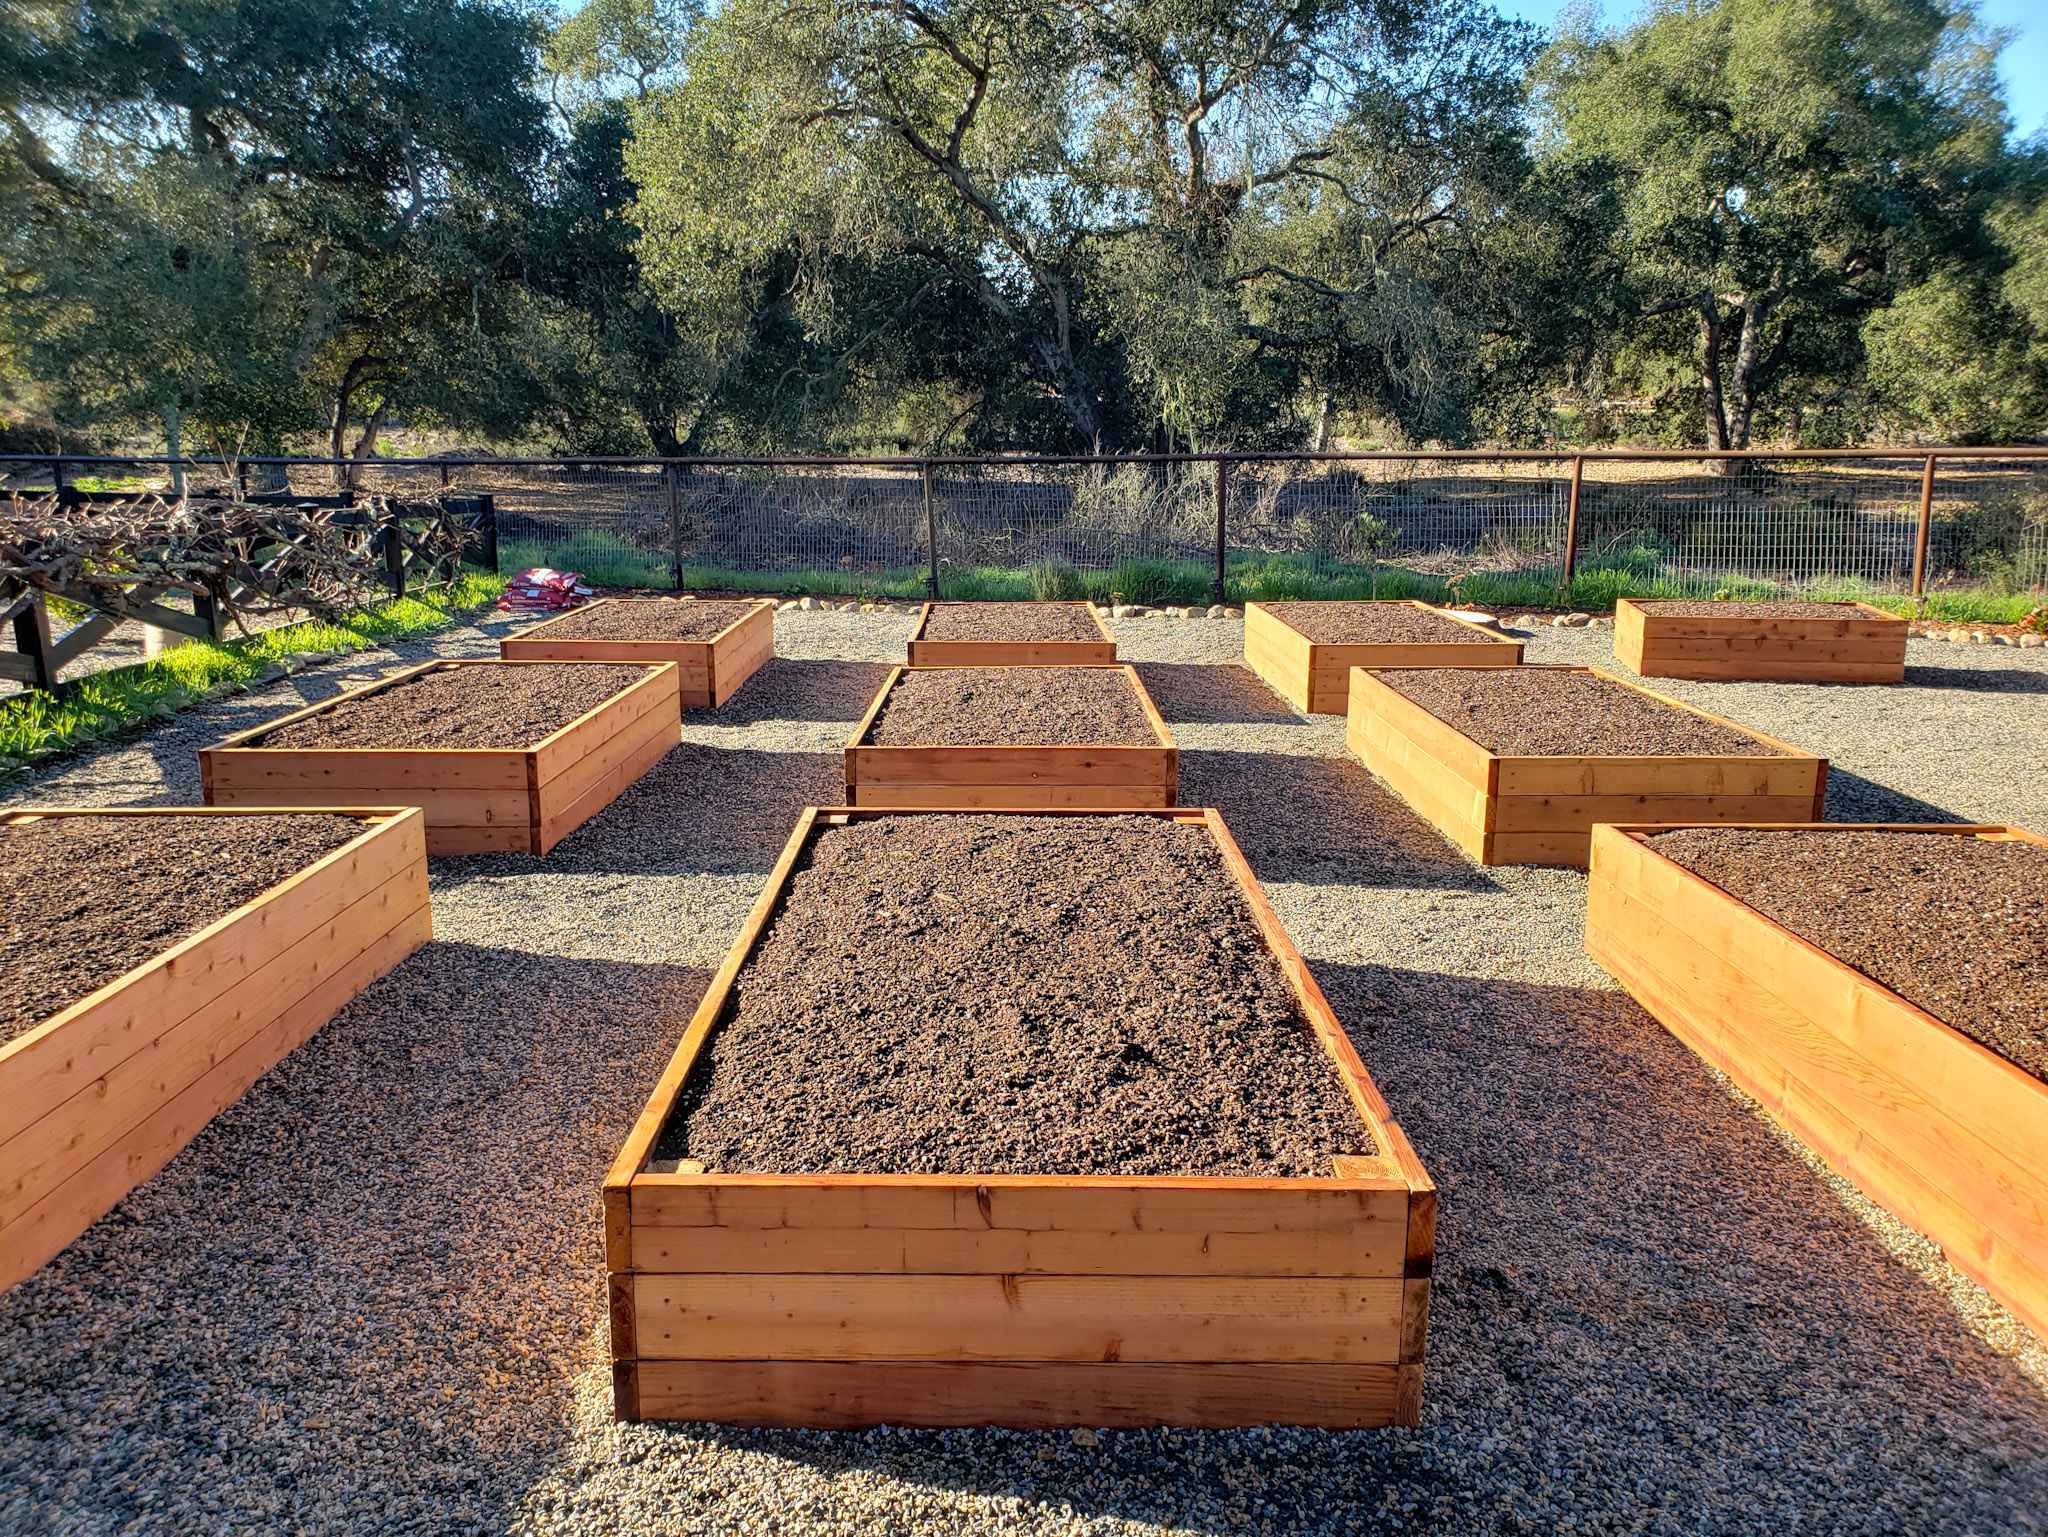 Can you fill the raised bed with sand